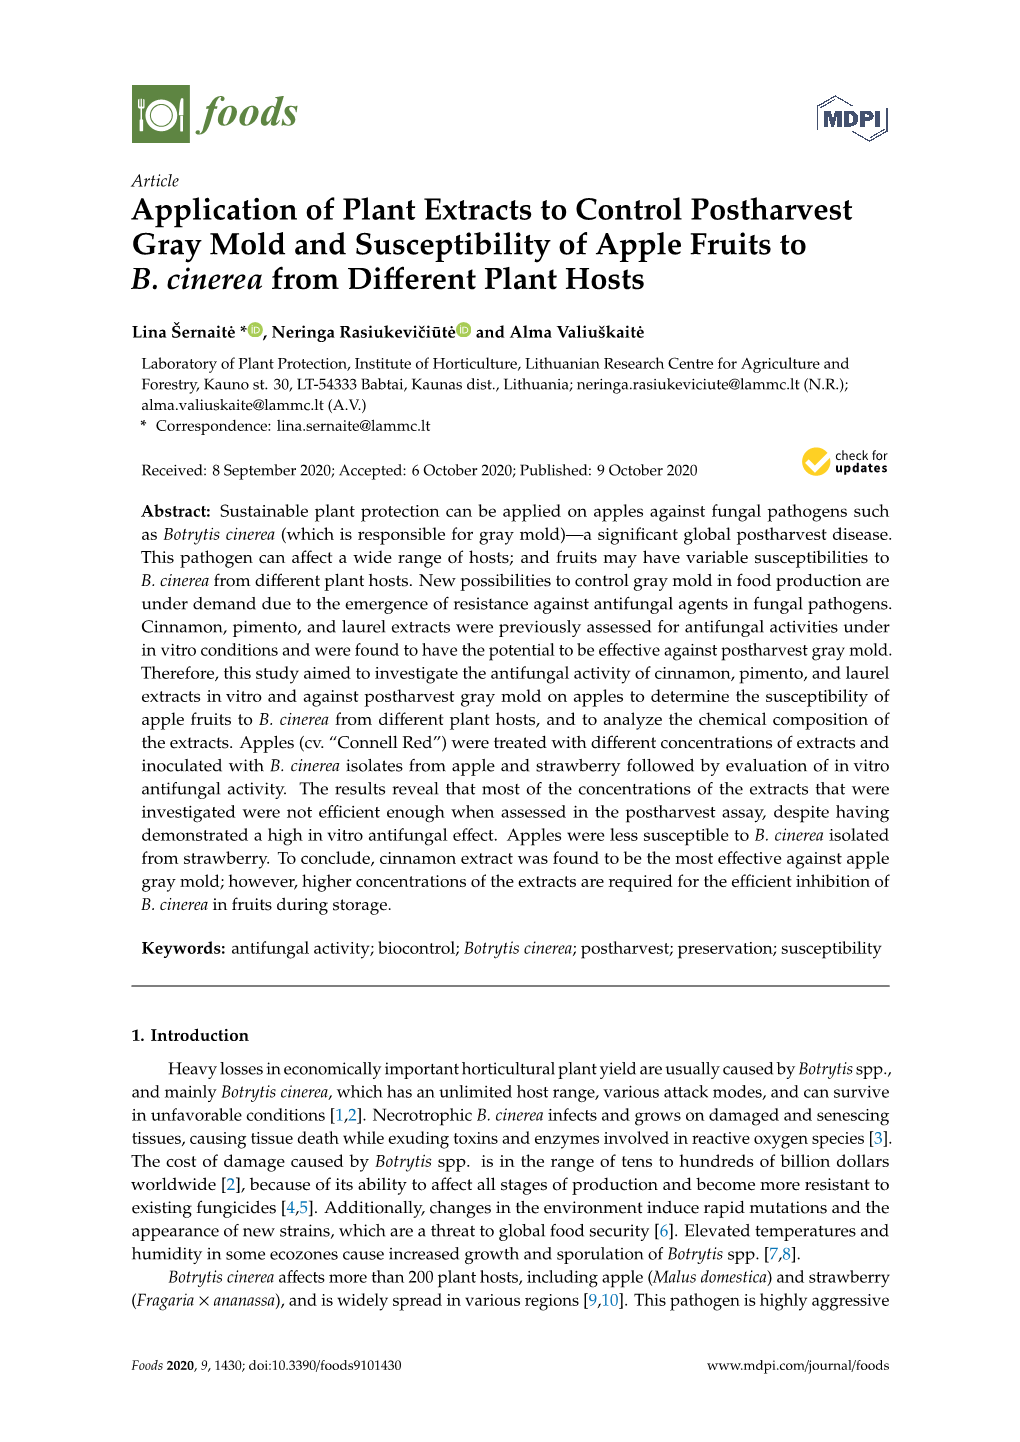 Application of Plant Extracts to Control Postharvest Gray Mold and Susceptibility of Apple Fruits to B